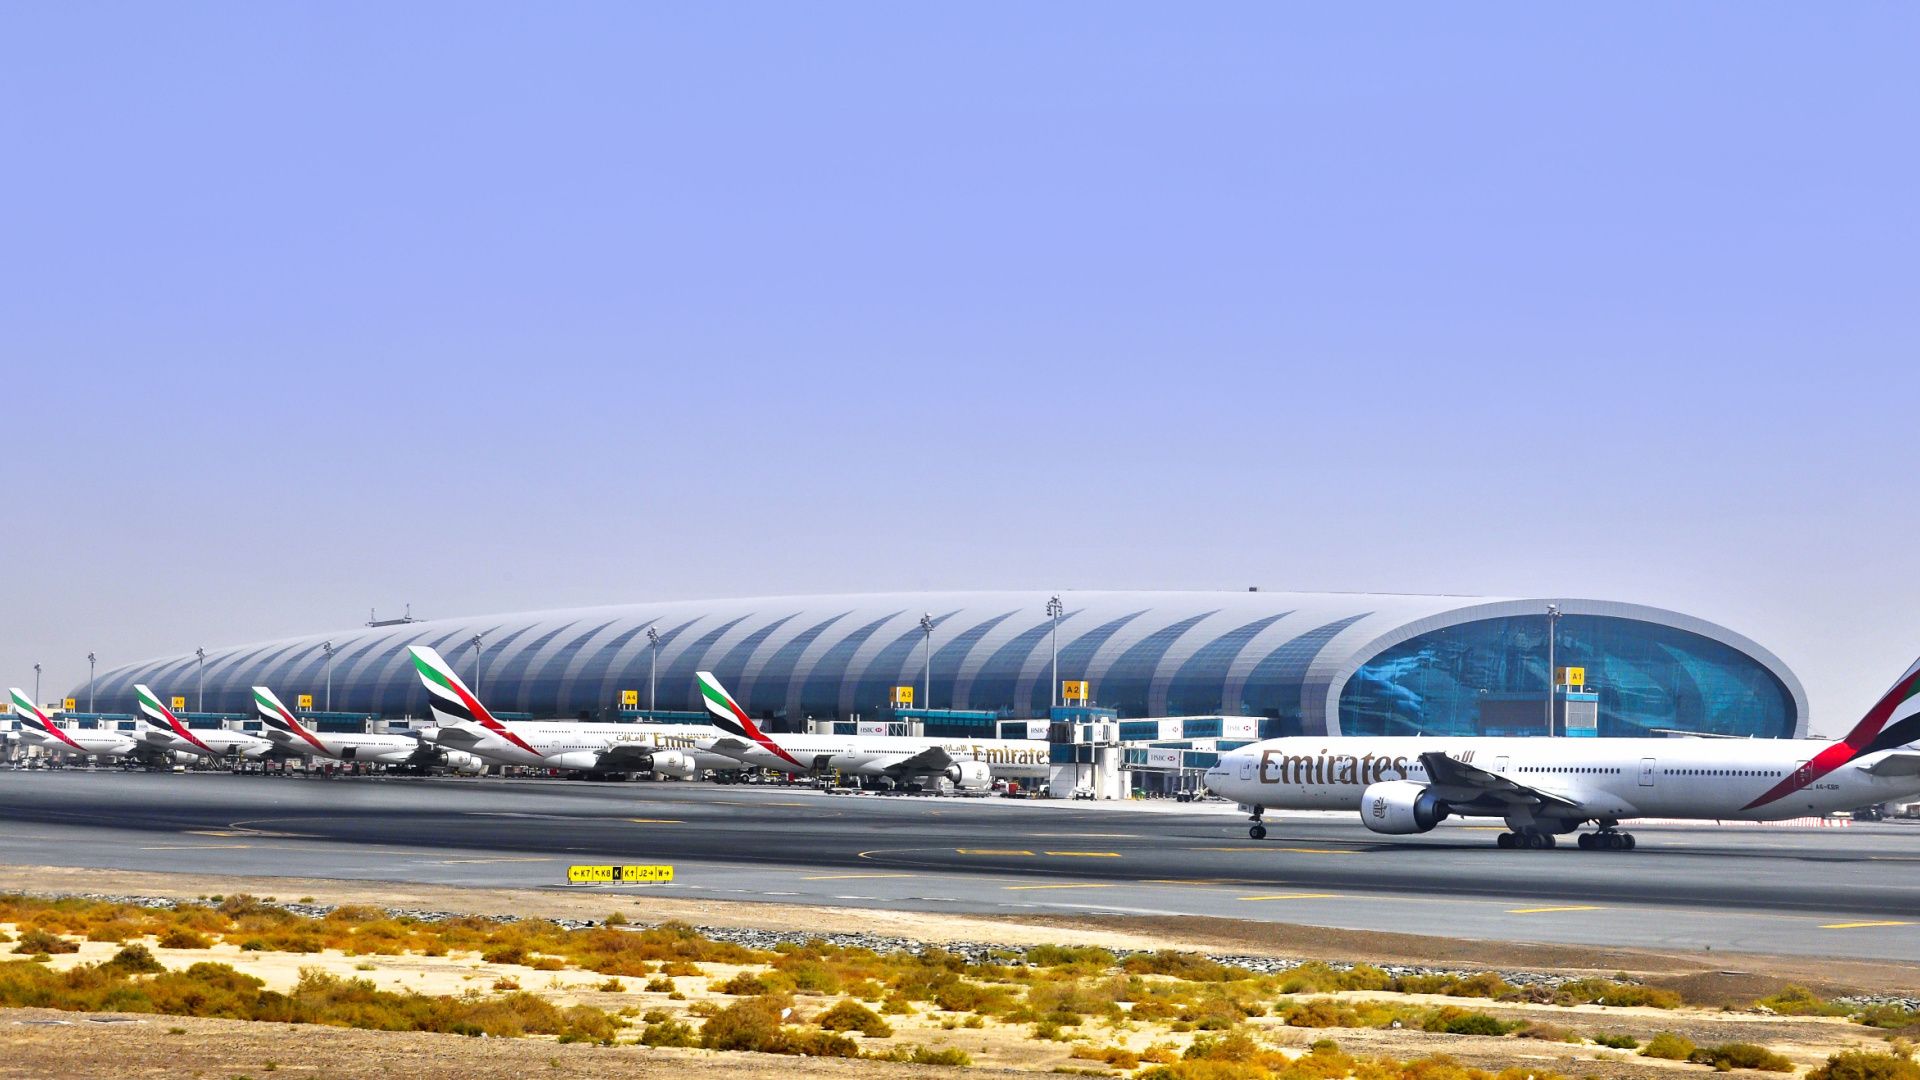 A Panoramic view of Dubai International Airport, with several Emirates aircraft on the apron.